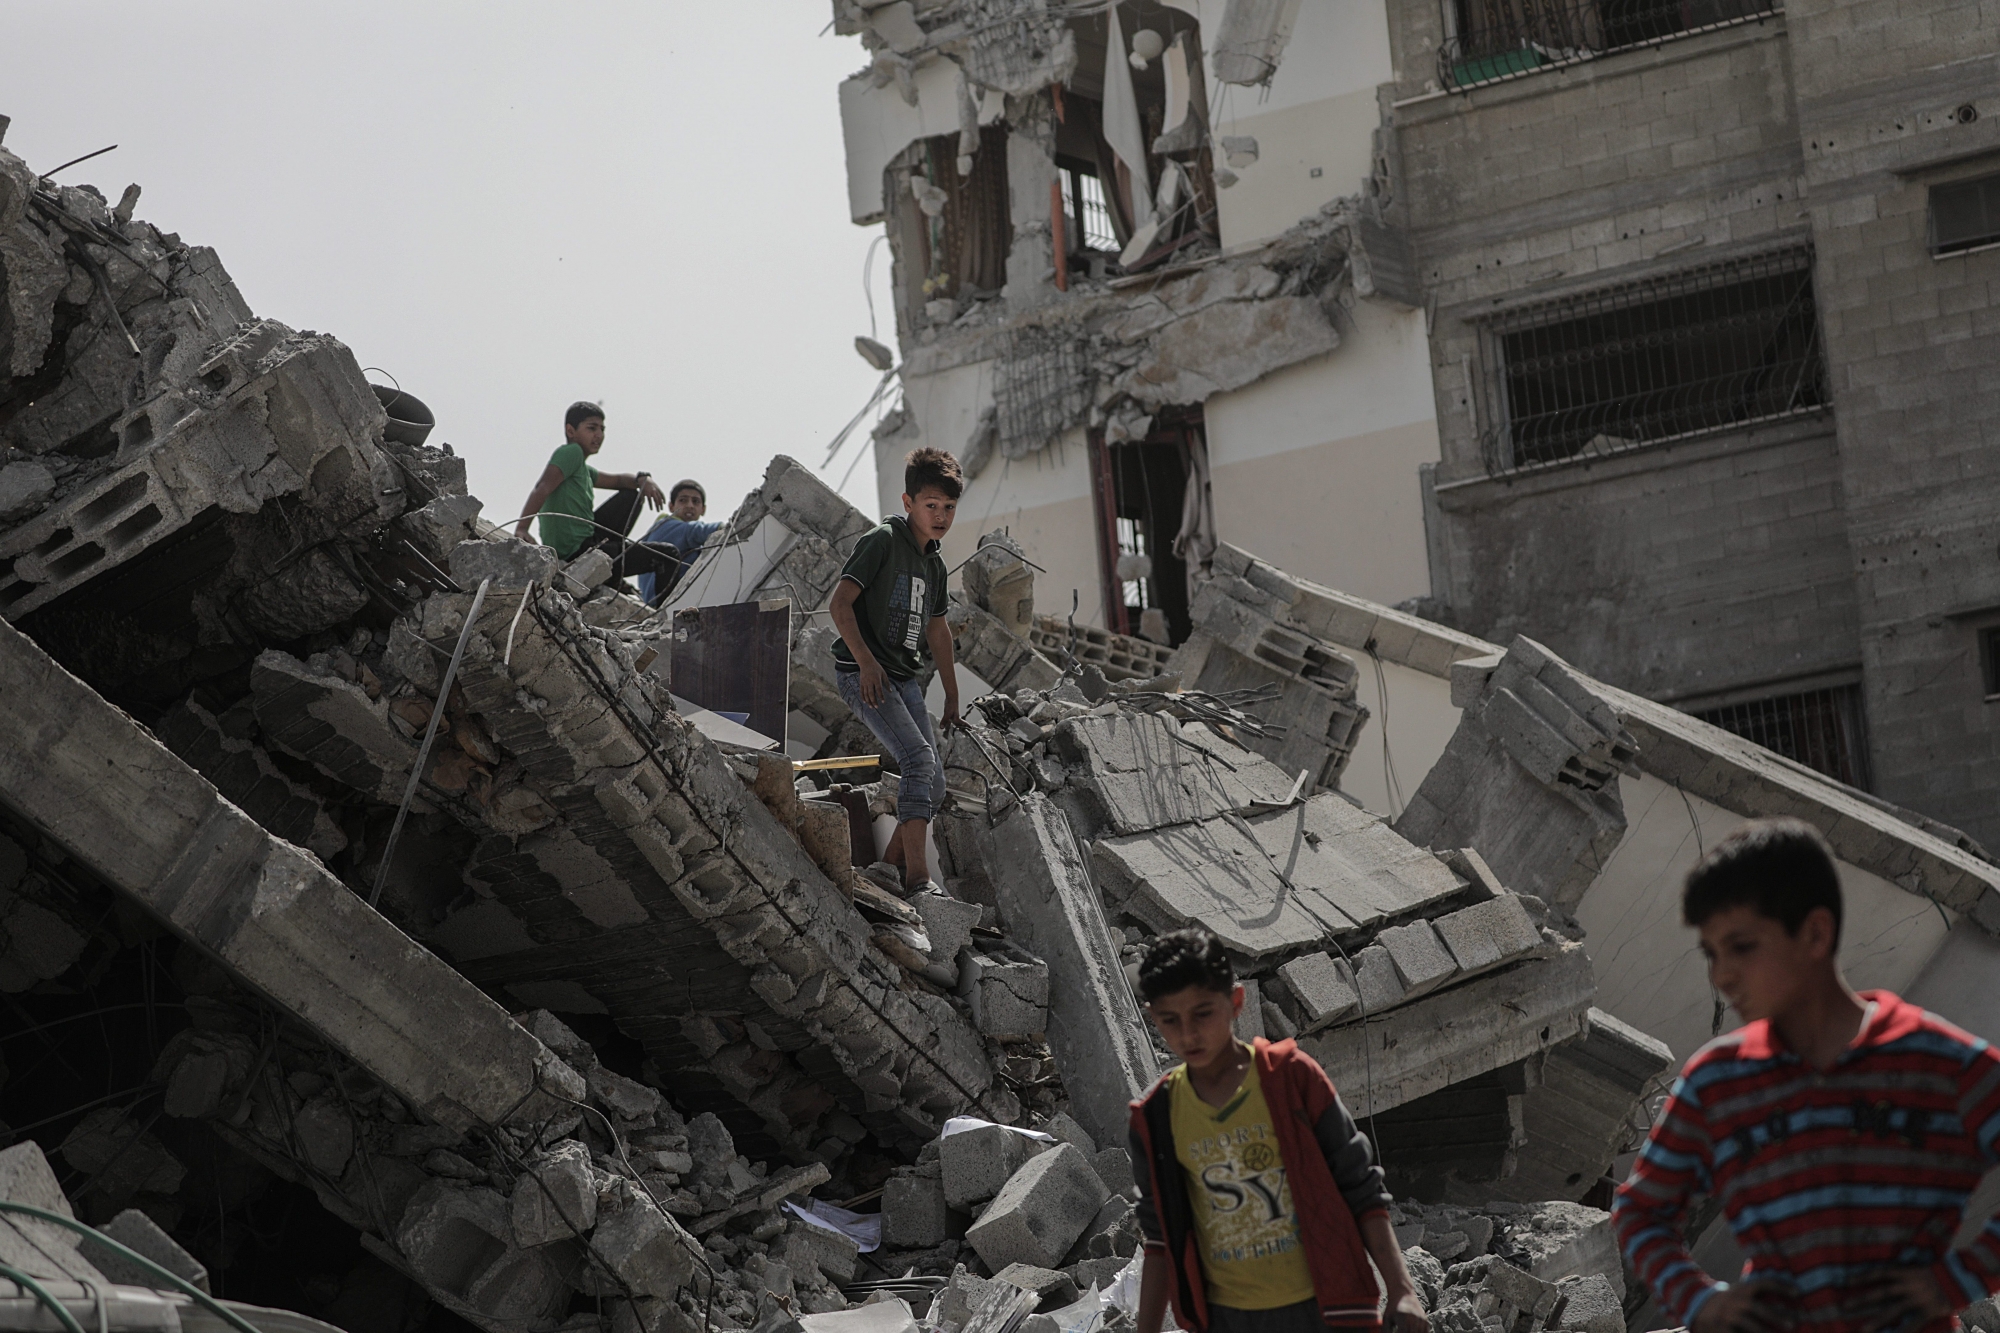 epa07550717 Palestinians inspect the rubble of adestroyed house which was damaged in Israeli air strikes in Gaza City, 06 May 2019. According to local media reports in Gaza: both sides had agreed on a ceasefire, assisted by Egypt, the United Nations (UN) and Qatar. However, the Israel Defense Forces (IDF) has not yet commented on any ceasefire. IDF said Militant groups from Gaza, fired some 690 rockets into southern Israel during the past 48 hours - 240 of which had been intercepted by the country's Iron Dome missile defense system. At least four Israelis were killed. In response, Israel had targeted 350 sites belonging to Hamas and Islamic Jihad and 23 Palestinians were killed.  EPA/MOHAMMED SABER MIDEAST ISRAEL PALESTINIANS GAZA CONFLICT AFTERMATH